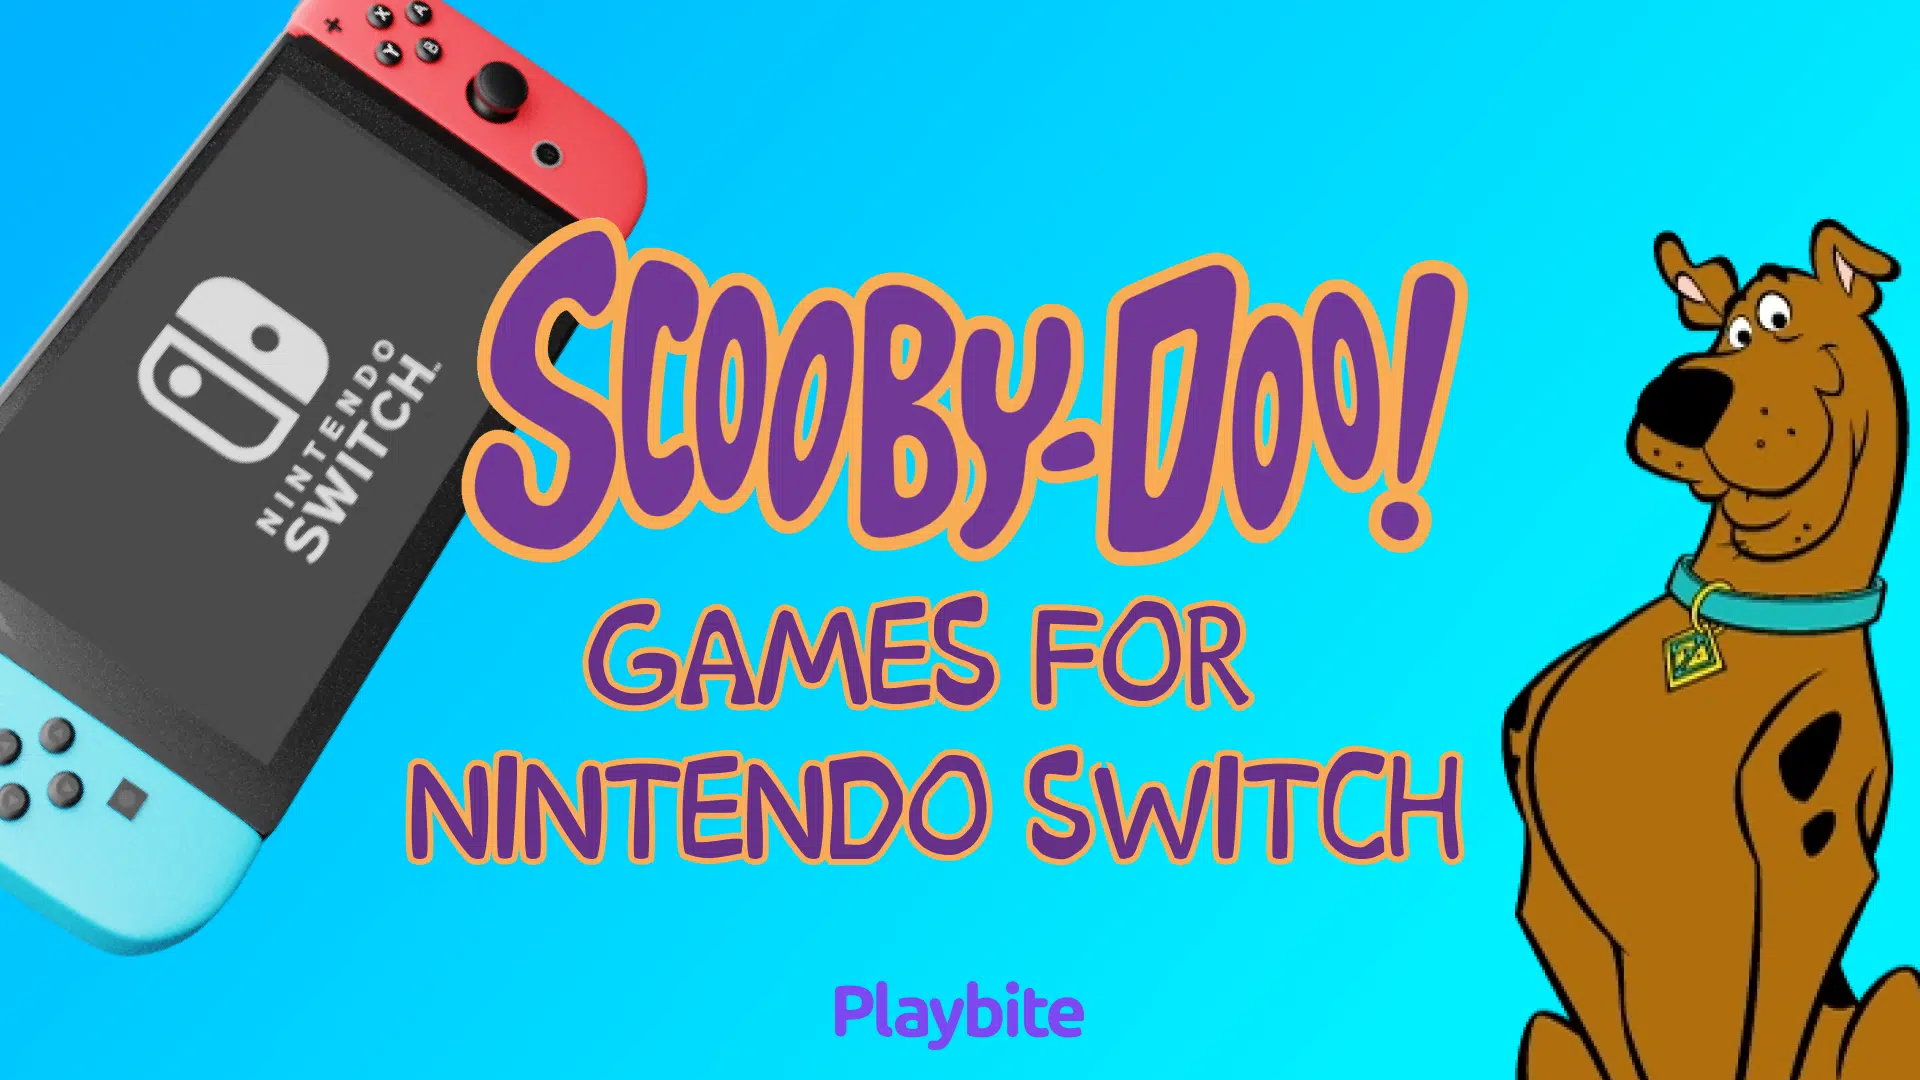 Scooby Doo Games for Nintendo Switch